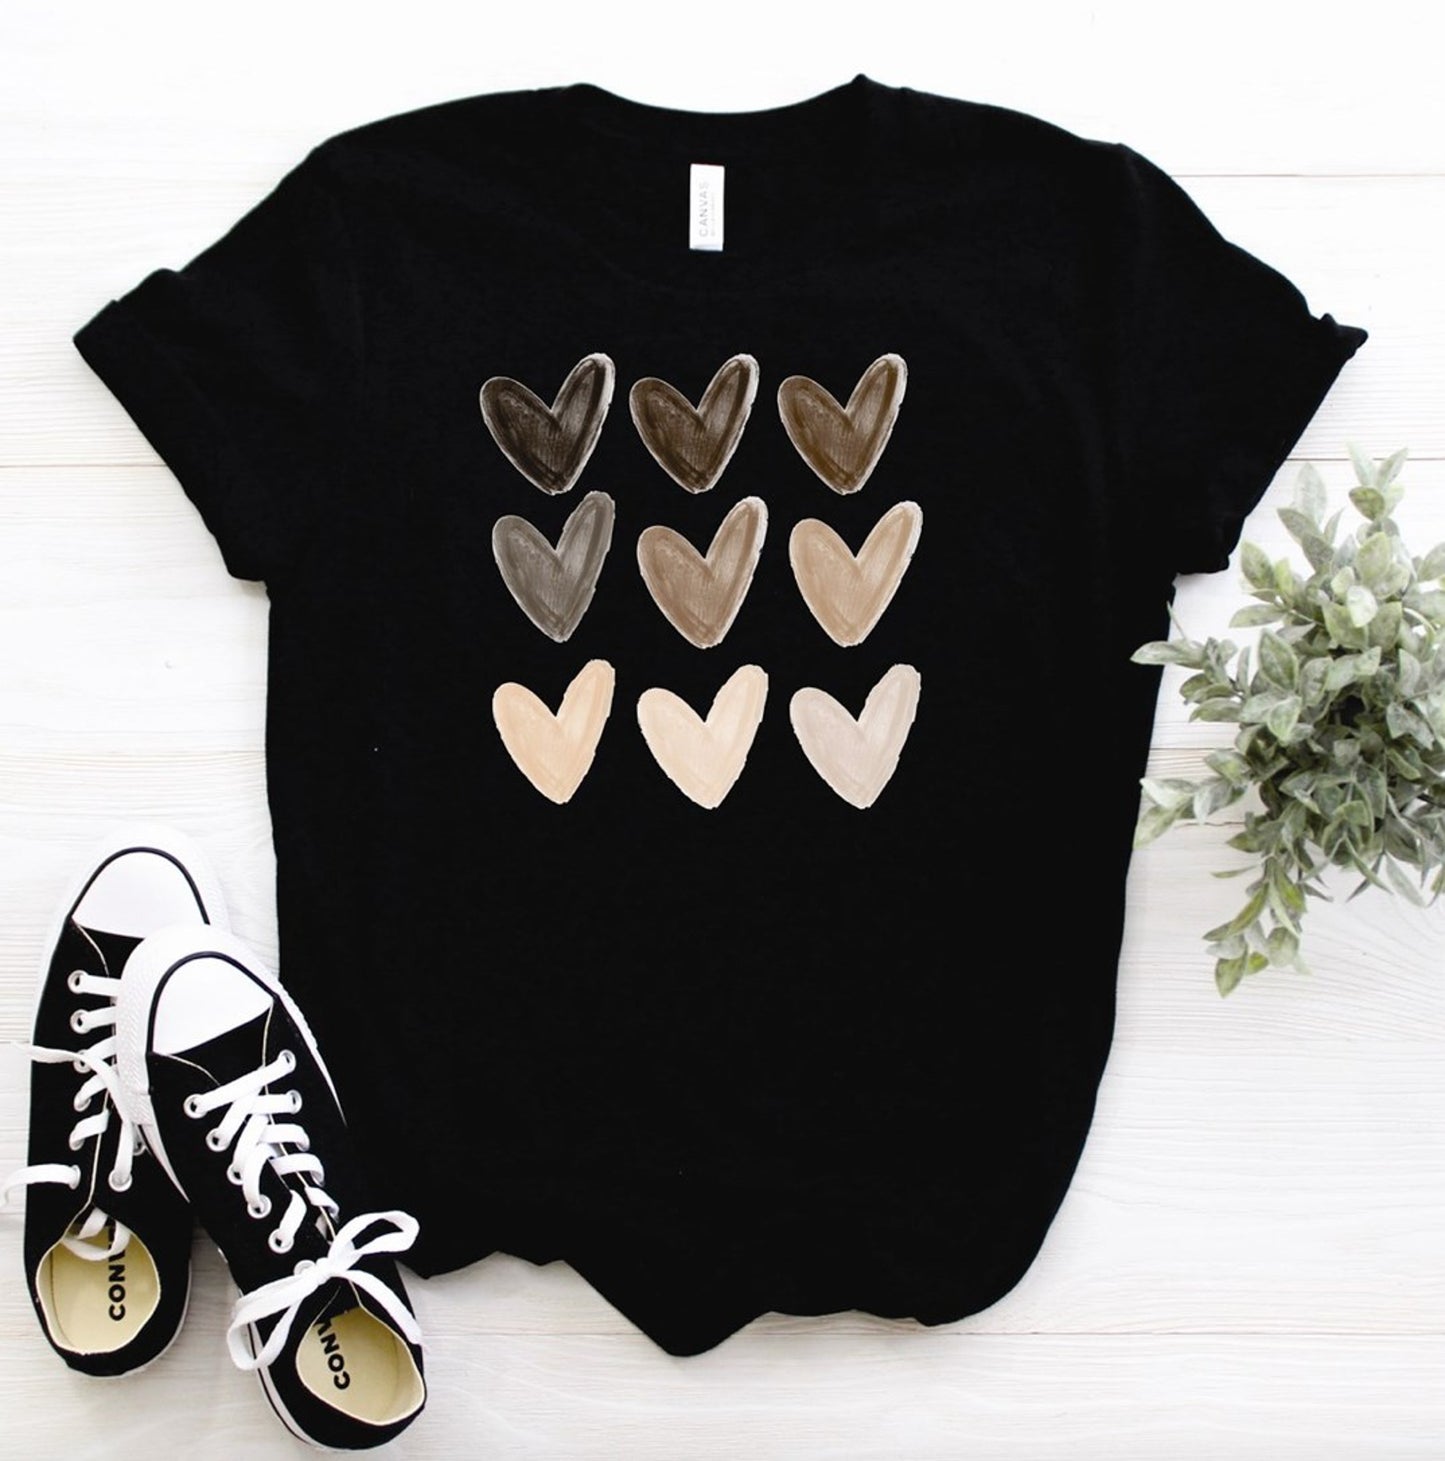 9 Different Skin Tone Hearts Tee